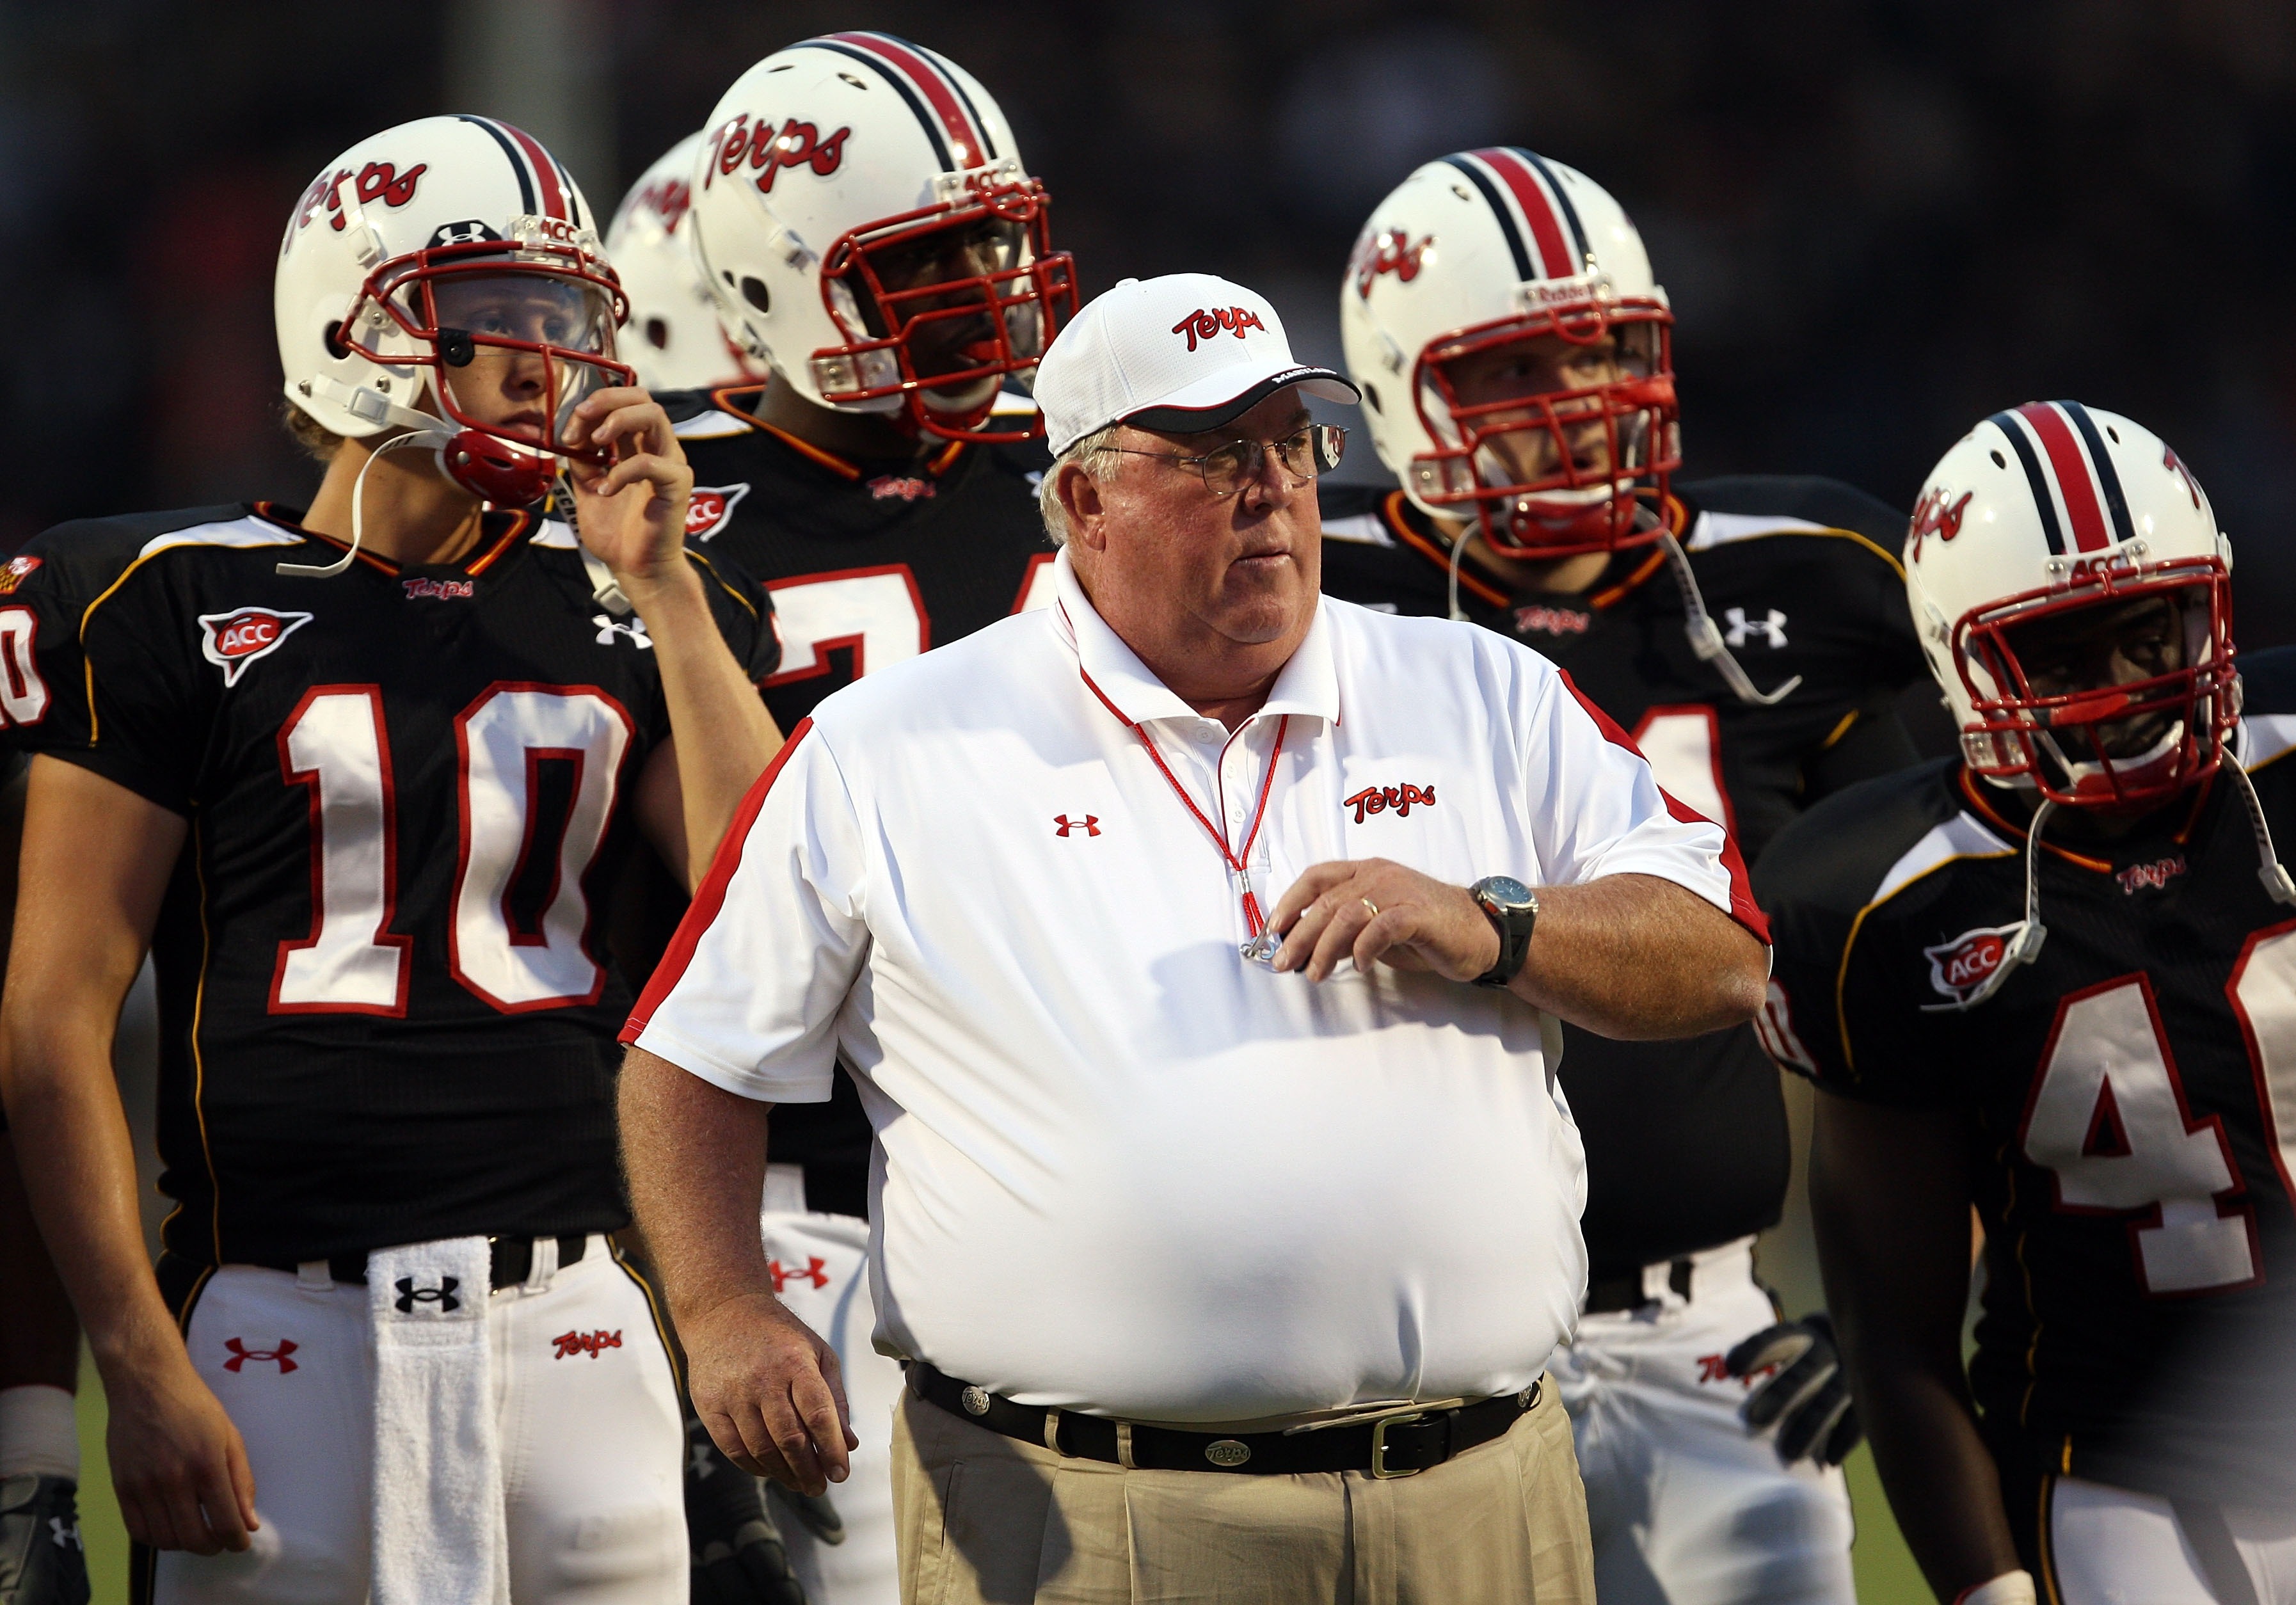 COLLEGE PARK, MD - SEPTEMBER 13:  Head coach Ralph Friedgen of the Maryland Terrapins watches player warm-ups prior to the game against the West Virginia Mountaineers on September 13, 2007 at Byrd Stadium in College Park, Maryland.  (Photo by Jamie Squire